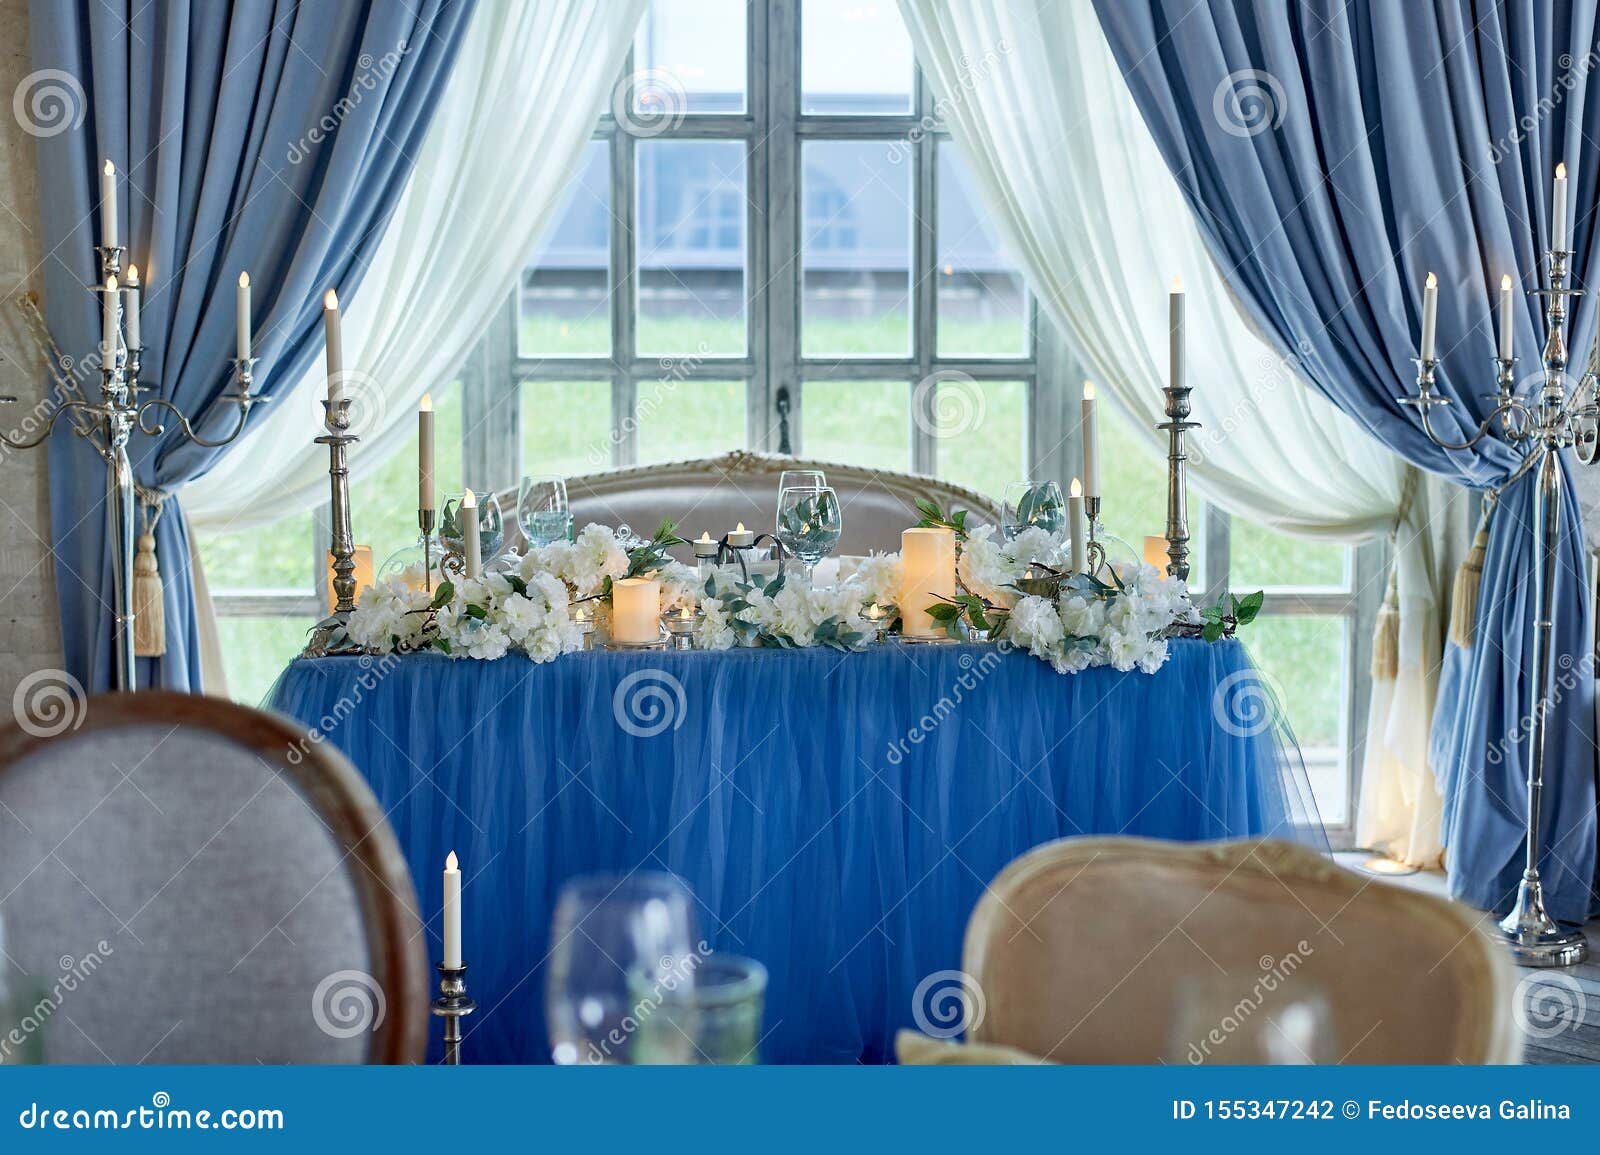 wedding table decorated with white flowers, candles. soft sofa with cushions, large window.blue and white.